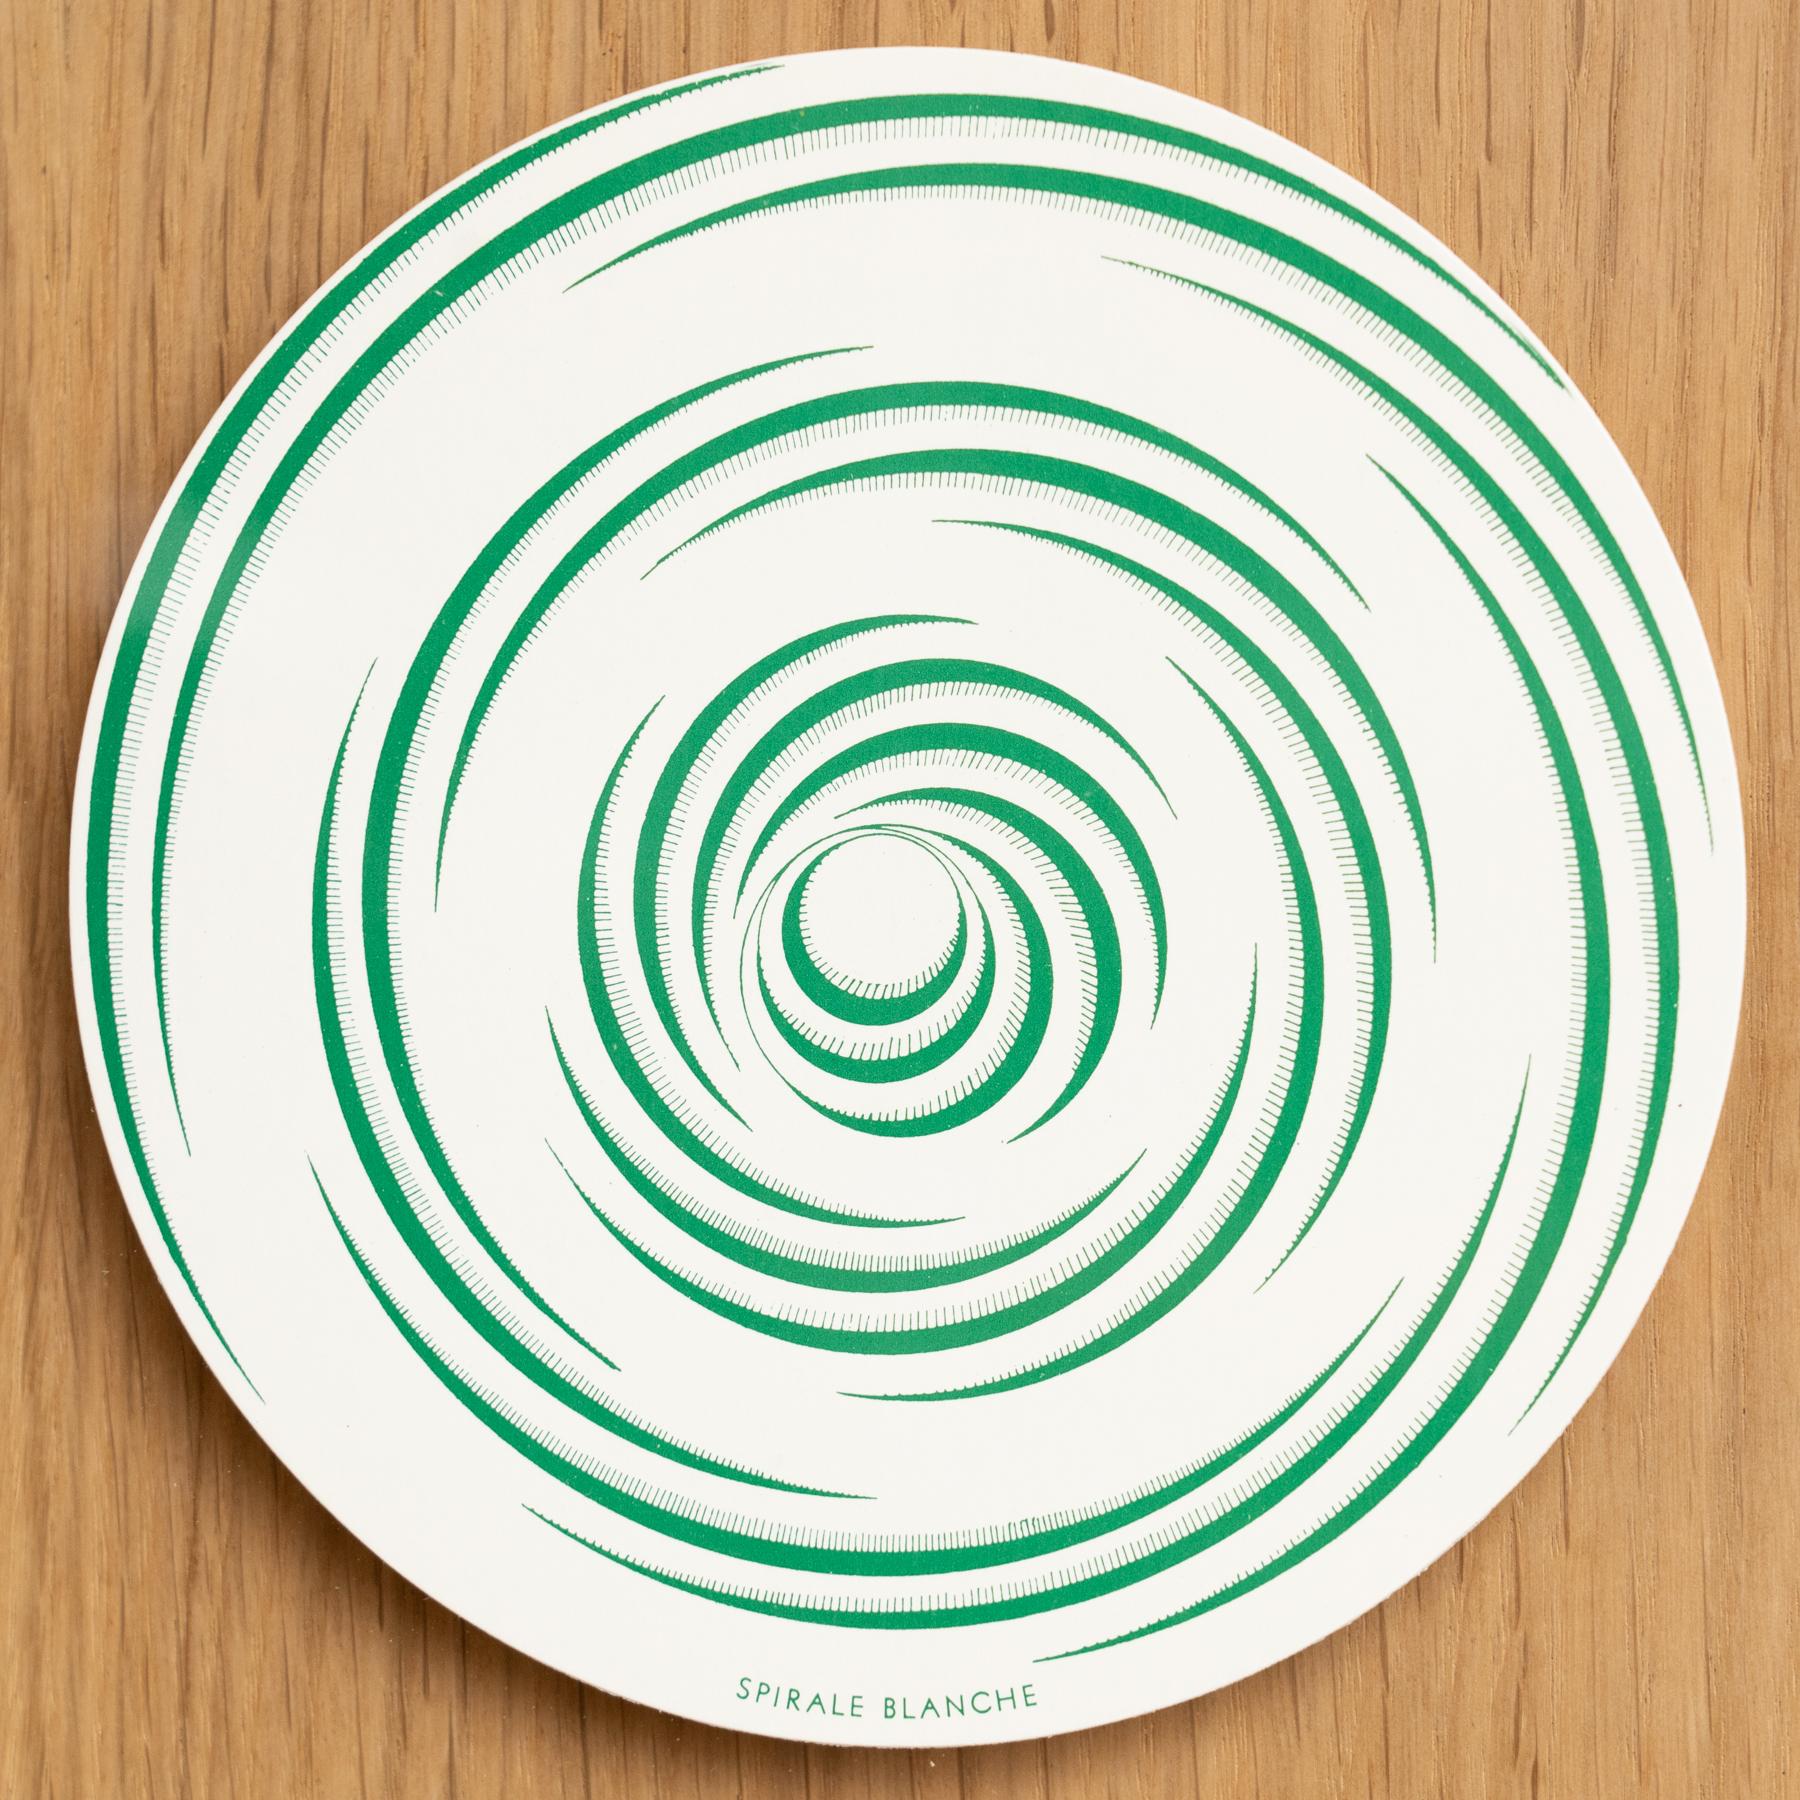 Late 20th Century Marcel Duchamp Green White Spirale Blanche Rotorelief by Konig Series 133, 1987 For Sale